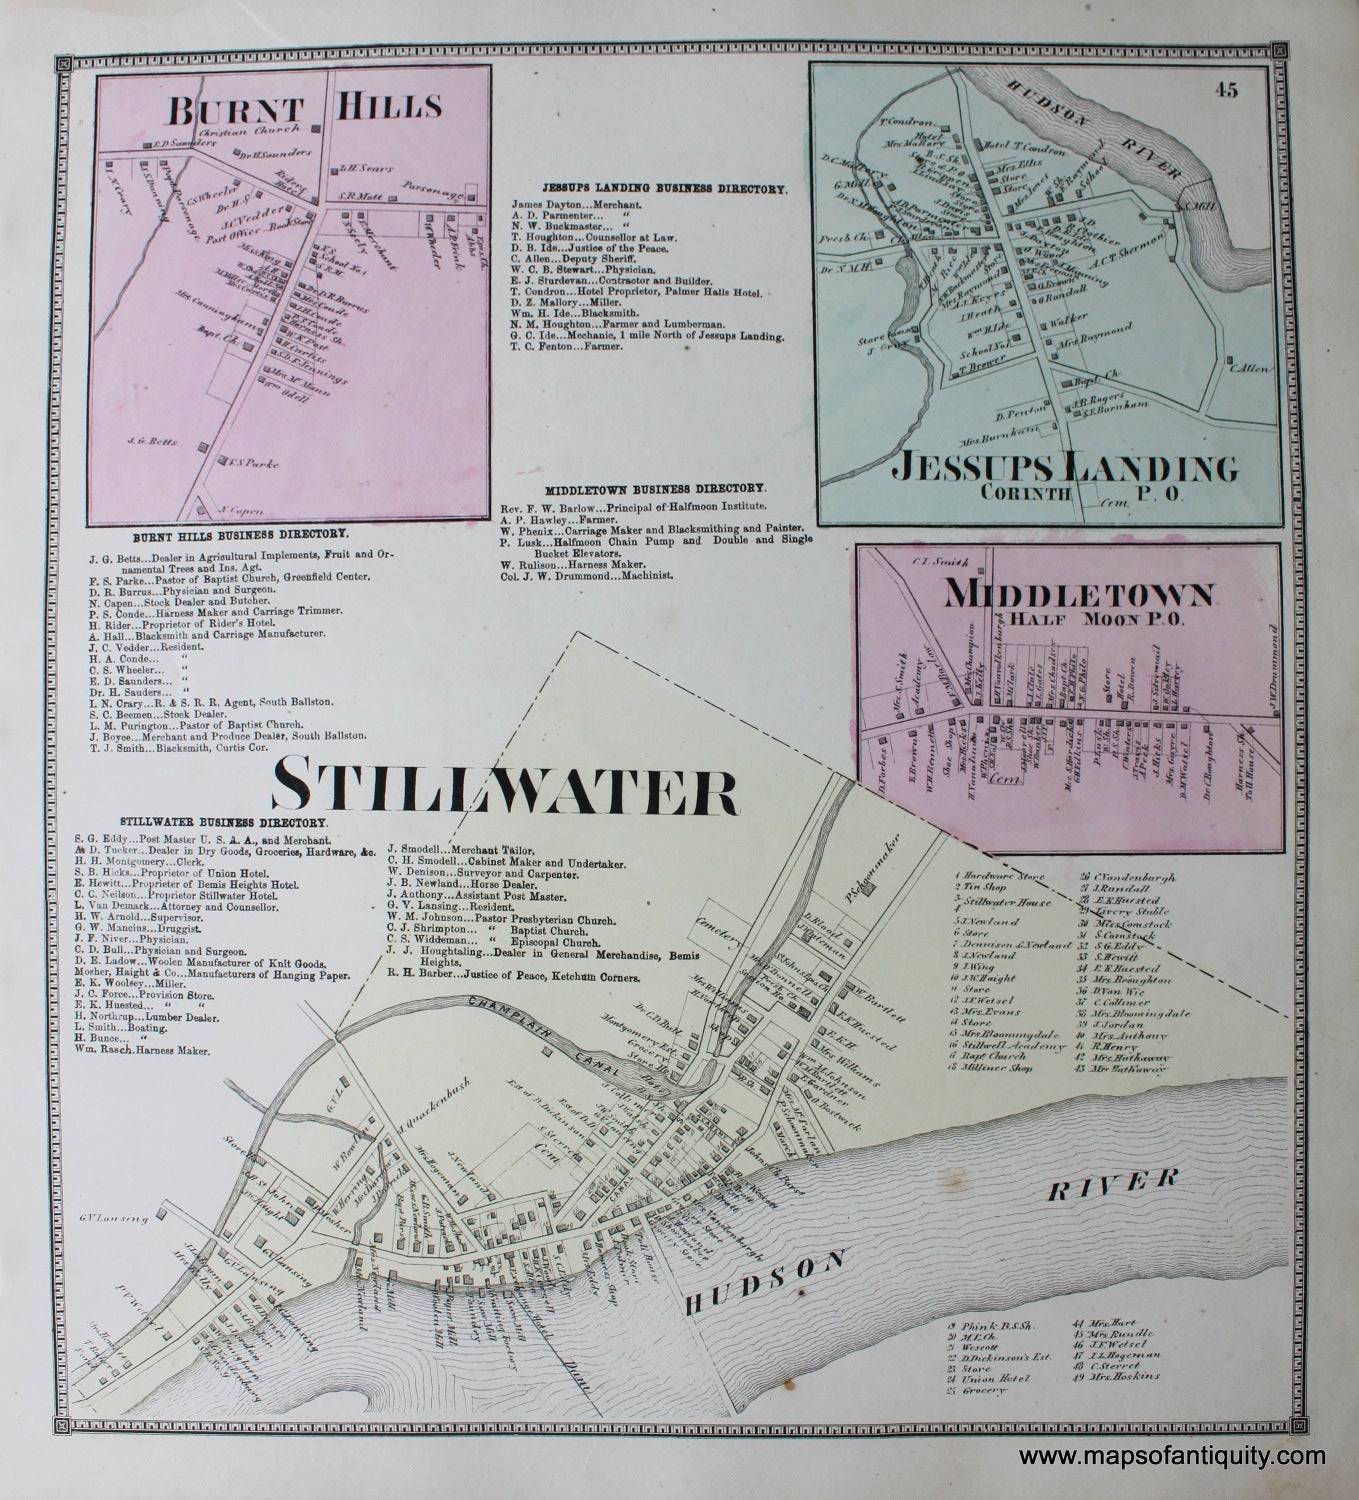 Hand-Colored-Engraved-Antique-Map-Stillwater-Burnt-Hills-Jessups-Landing-Corinth-PO-Middletown-Half-Moon-PO-New-York-United-States-Northeast-1866-Stone-and-Stewart-Maps-Of-Antiquity